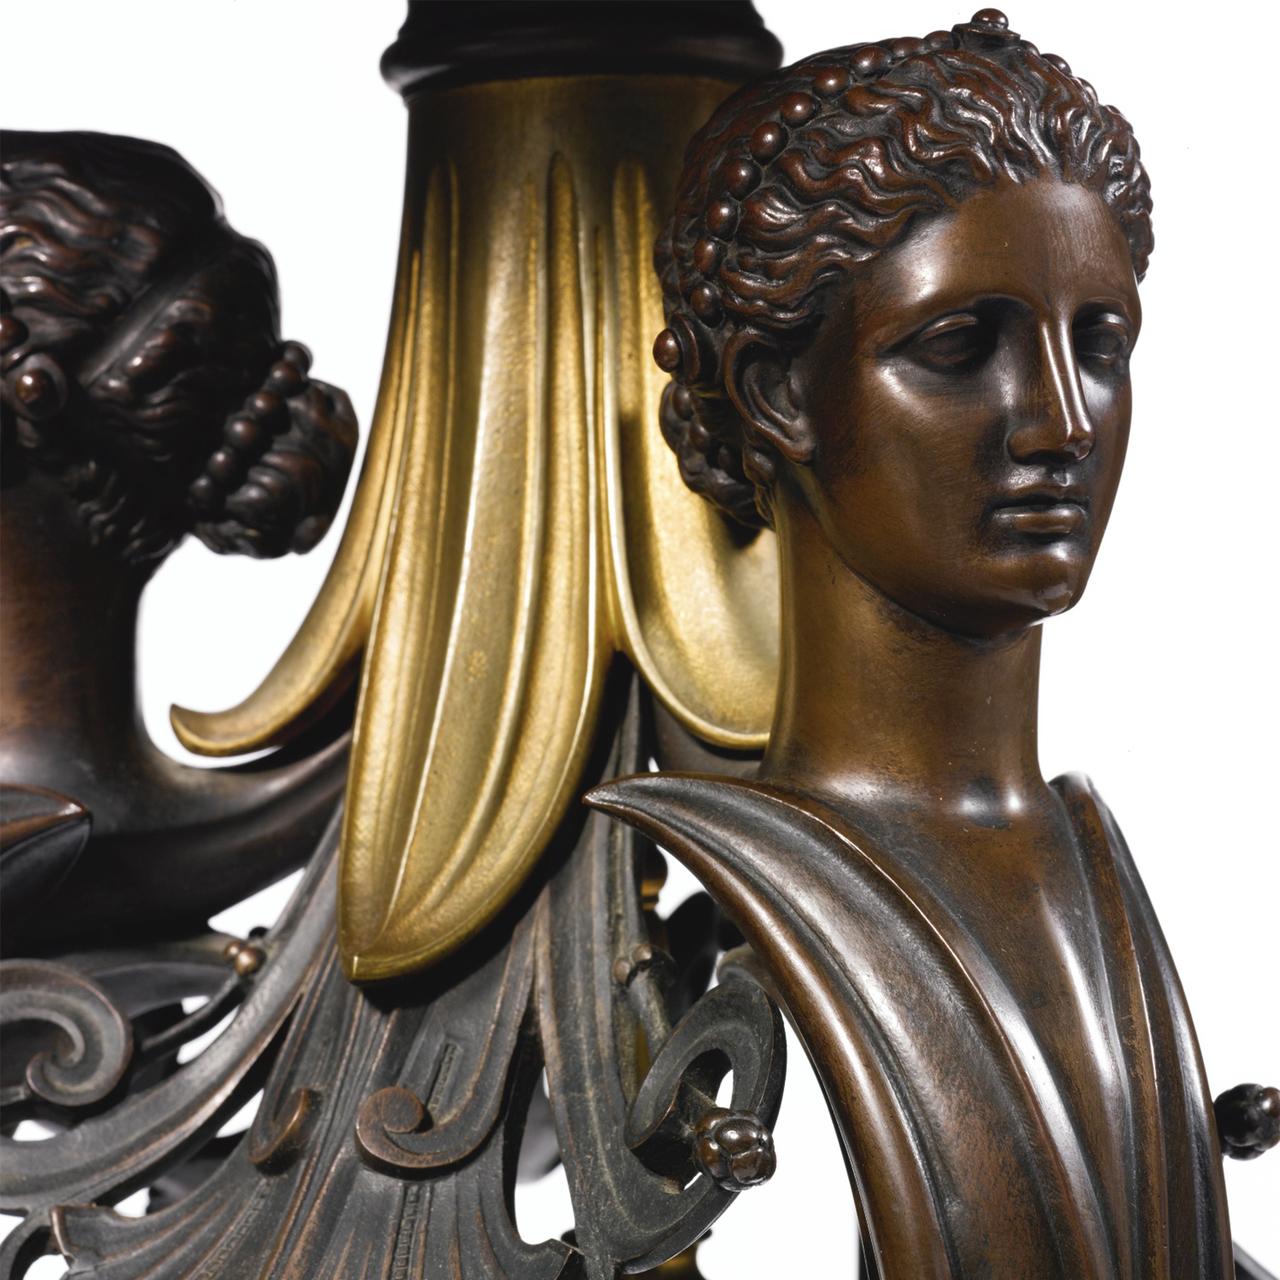 A Fine Quality French Neo-grec patinated and gilt bronze revolving pedestal with female heads wearing greek hairstyles with organically shaped leaf decorations around them. 

Artist: Ferdinand Barbedienne (1810-1892)
Origin: Paris, France
Date: